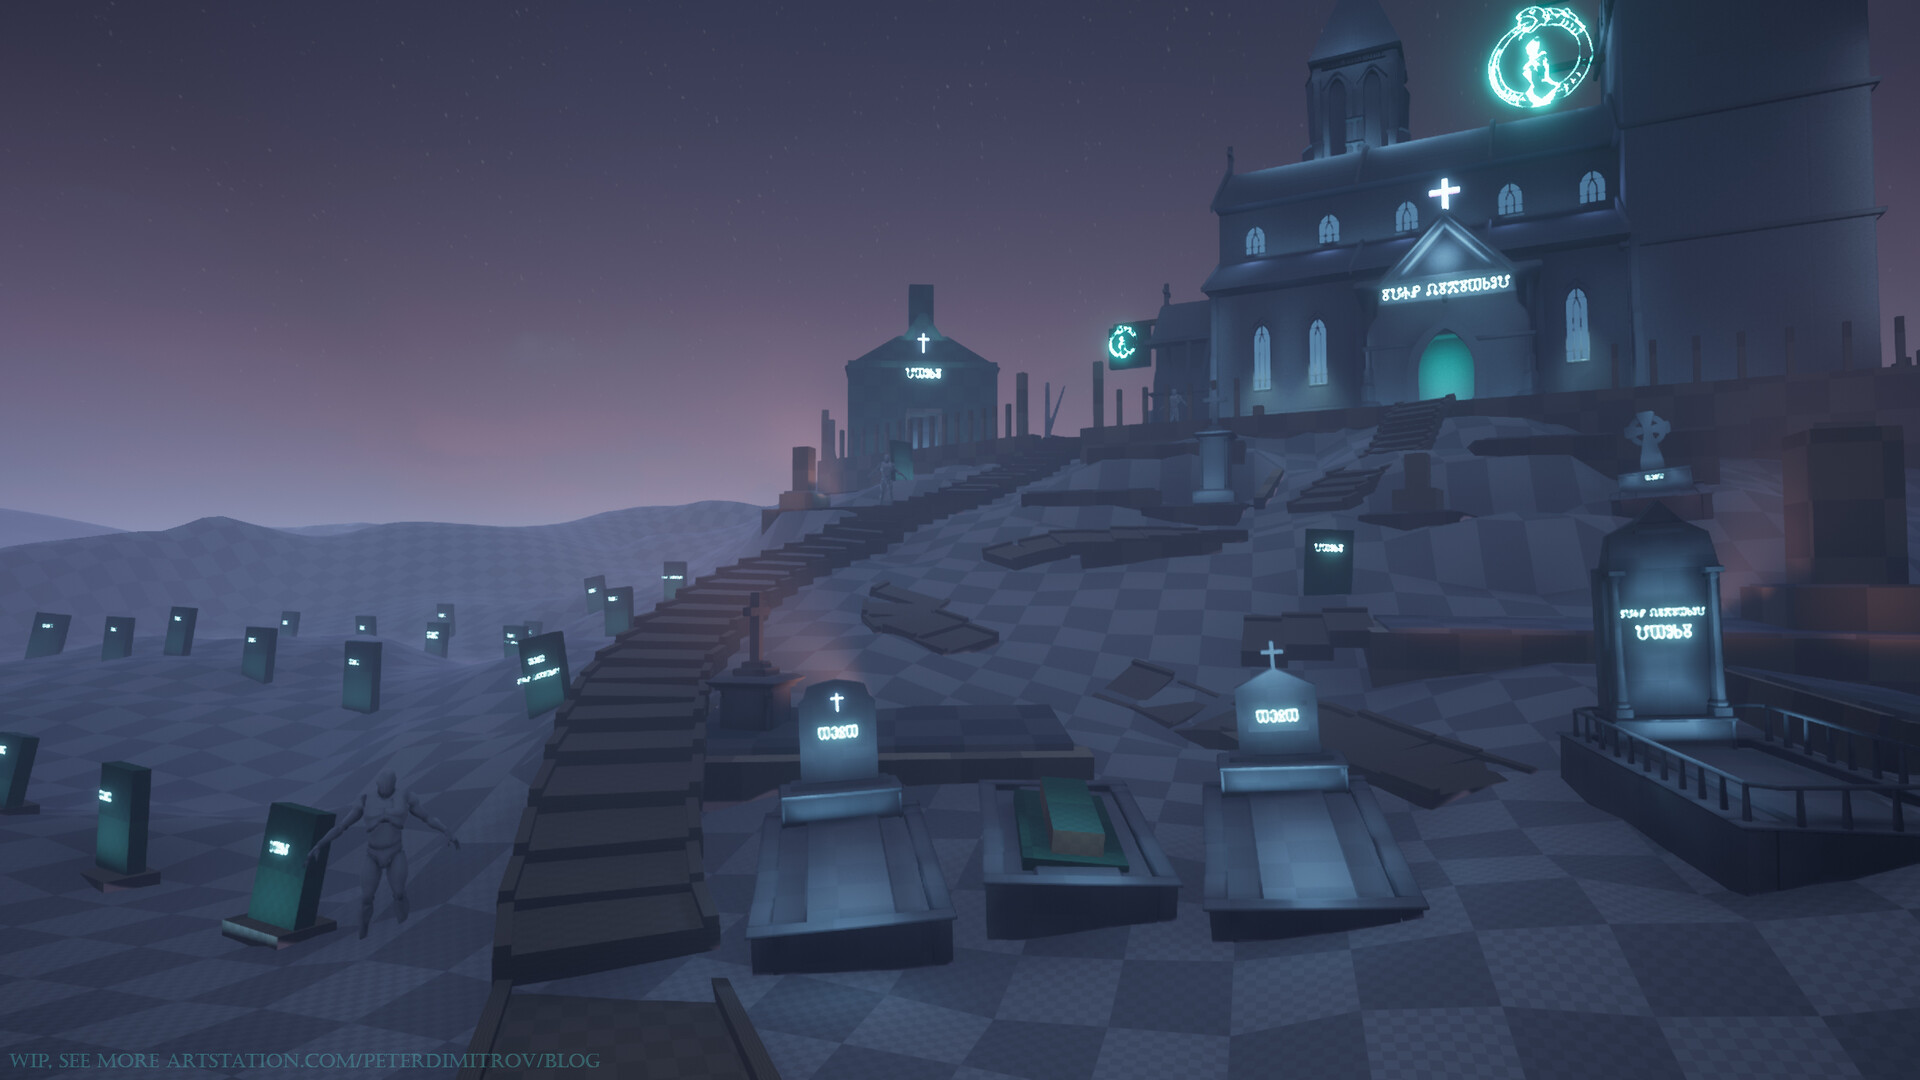 UE4 screenshot showcasing barren, checkerboard textured landscape. On it there are lots of gravestones with neon sings. The cathedral in the distance now has neon signs attached to it too, and compared to the previous post images is larger in scale.